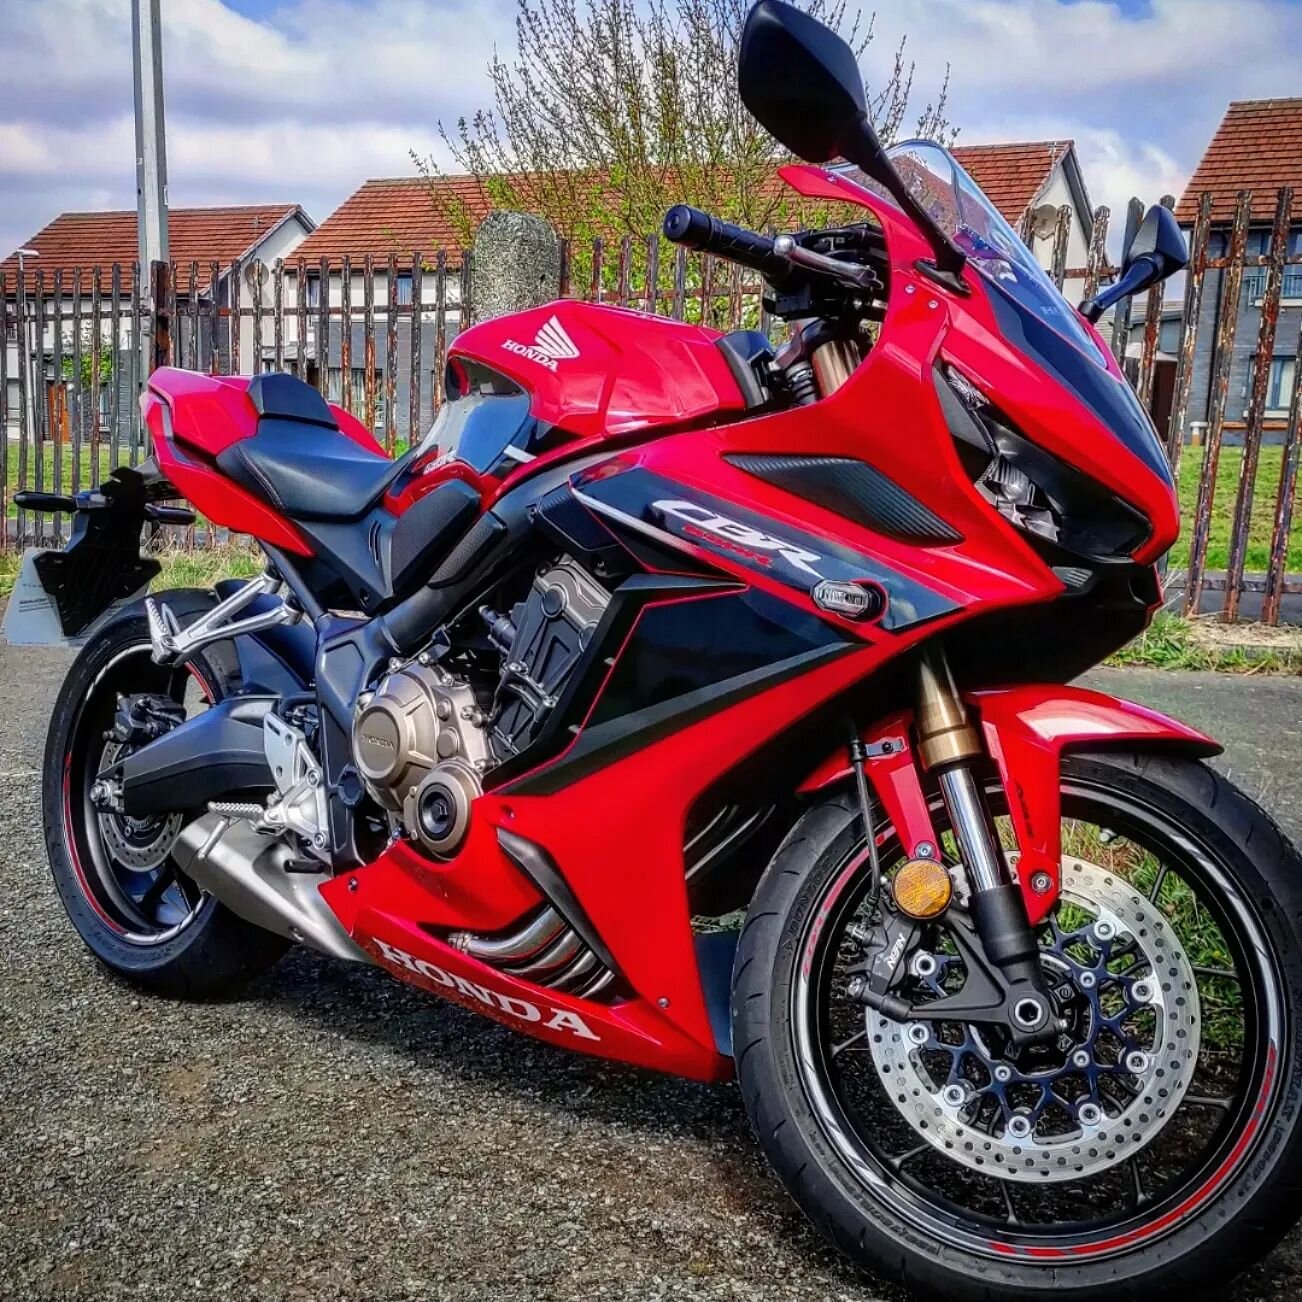 Fantastic looking Honda cbr 650r booked in for our winter protection package plus ceramic coating.
.
. #honda #hondacbr650r #650r #cbr650r #hondacbr #motorcycledetailing #detailing #valeting #motorcyclevaleting #valetingedinburgh #contrastvaleting #m